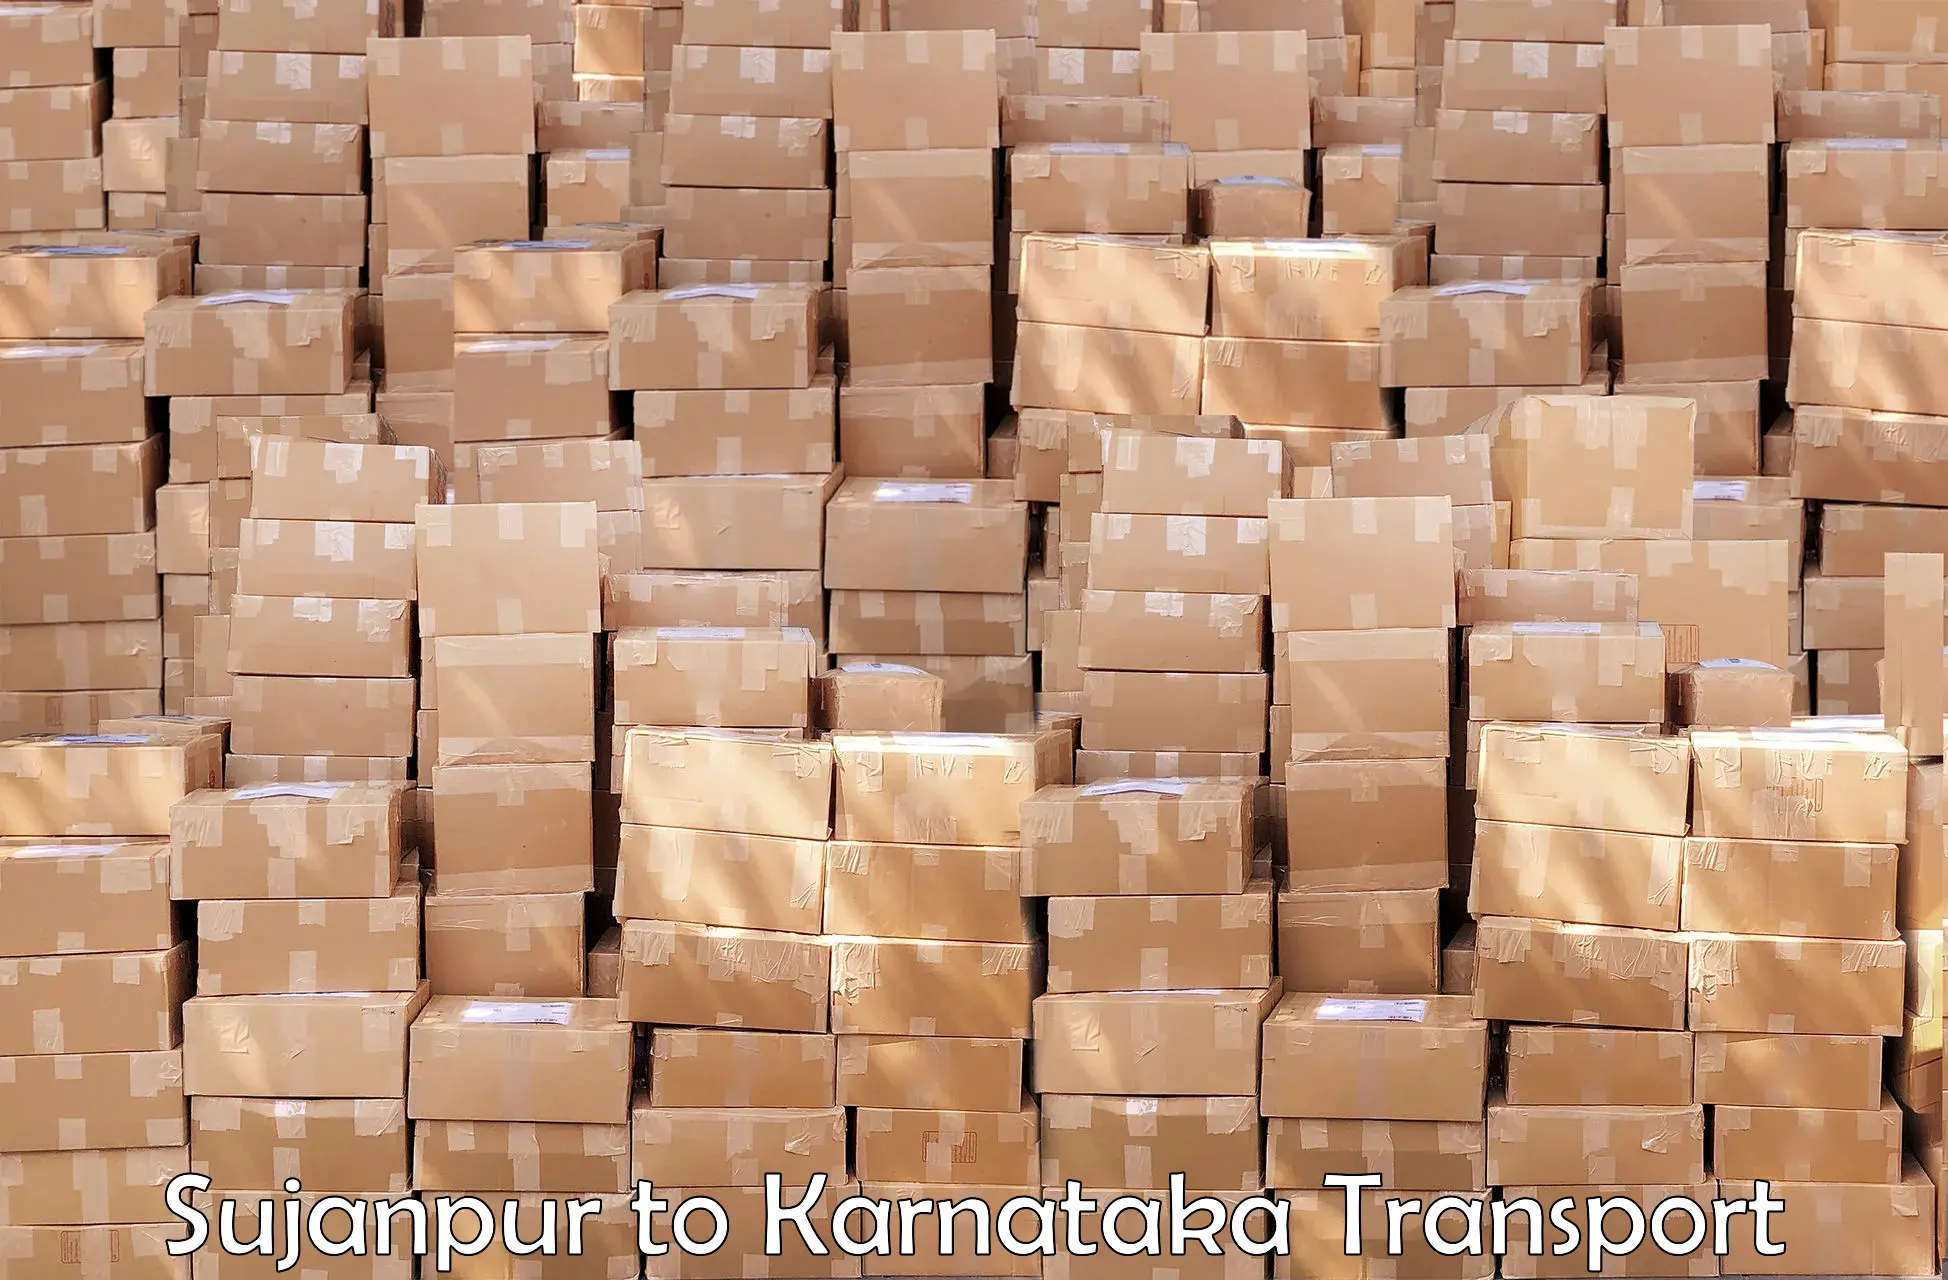 Truck transport companies in India Sujanpur to Baindur